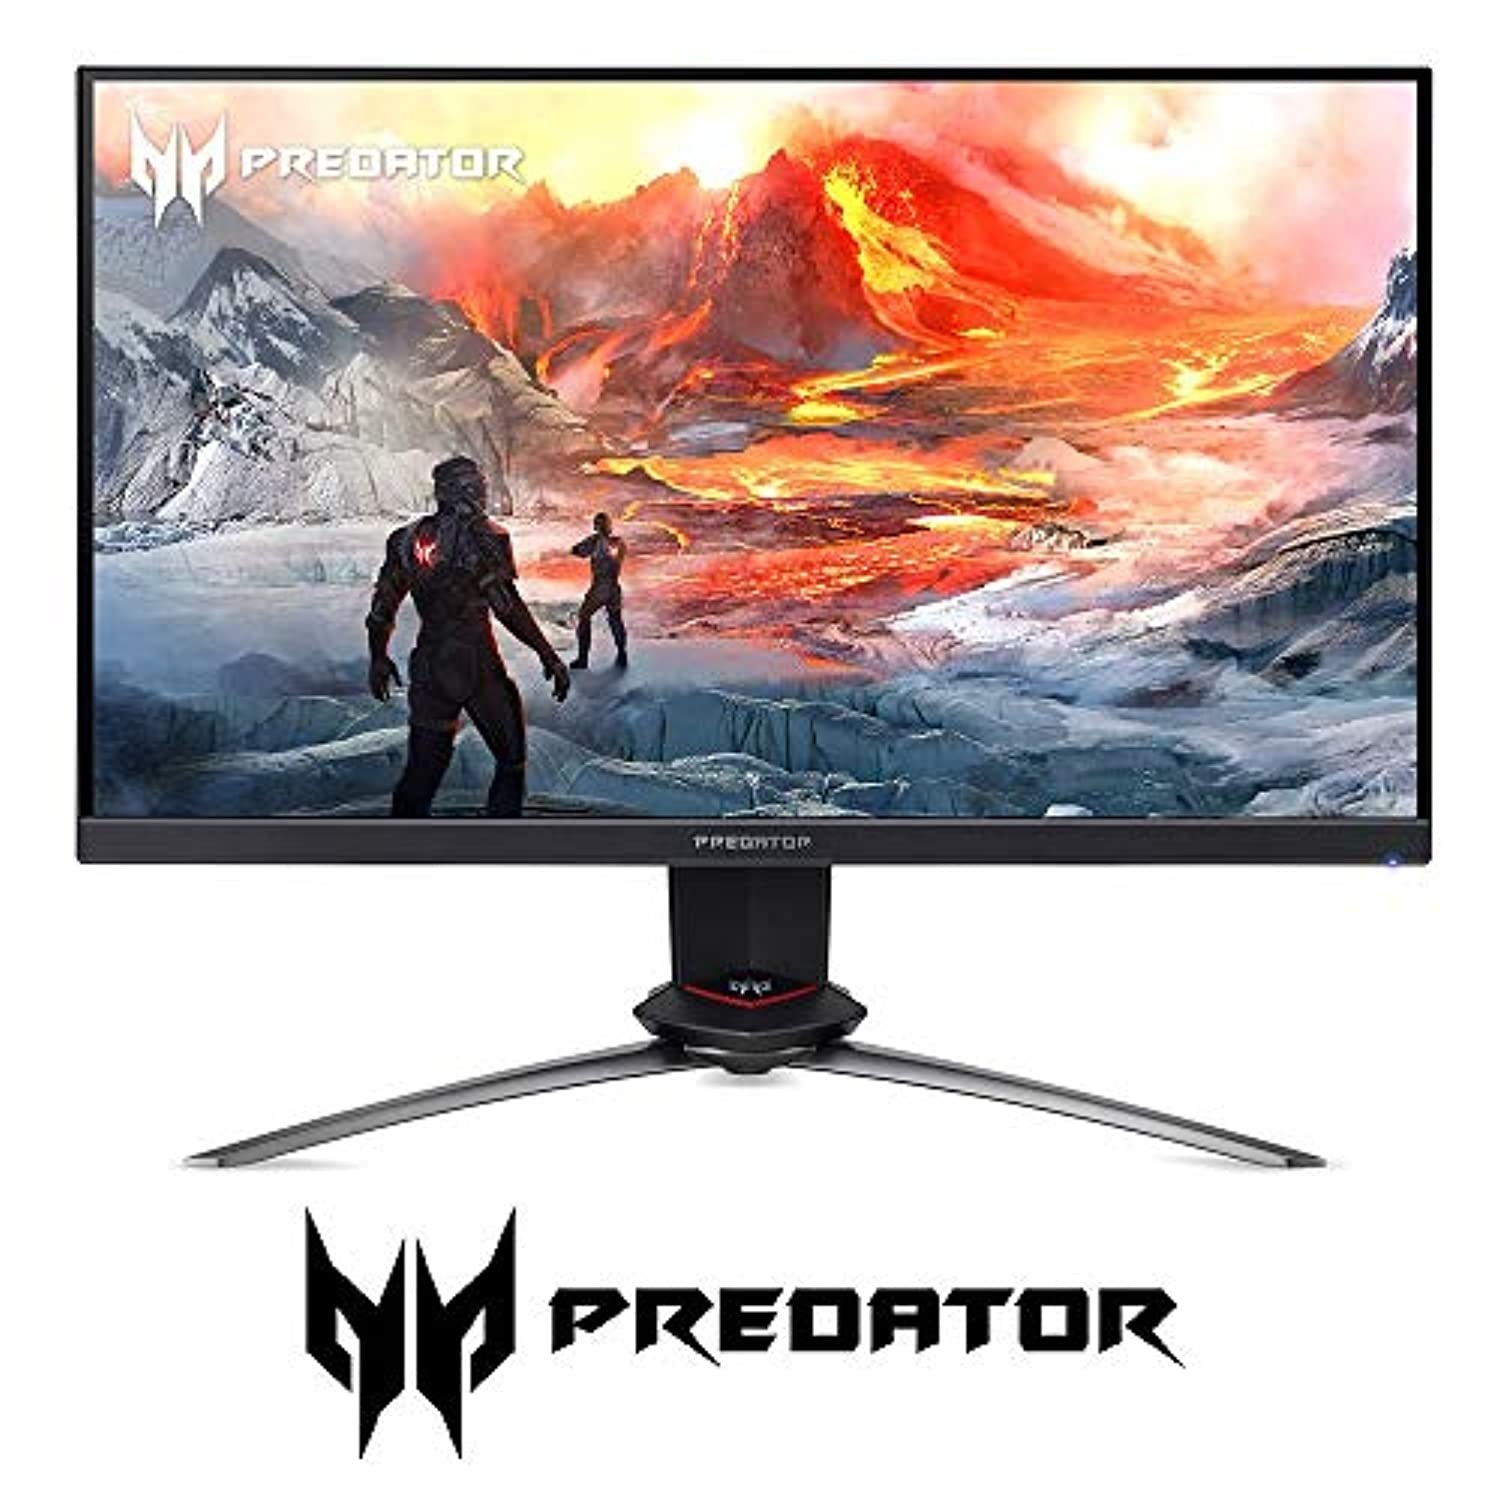 Acer Predator XB253Q Gpbmiiprzx 24.5" FHD (1920 x 1080) IPS NVIDIA G-SYNC Compatible Gaming Monitor, Up to 0.9ms (G to G), 144Hz, 99% sRGB (1 x Display Port (UM.KX3AA.P03)